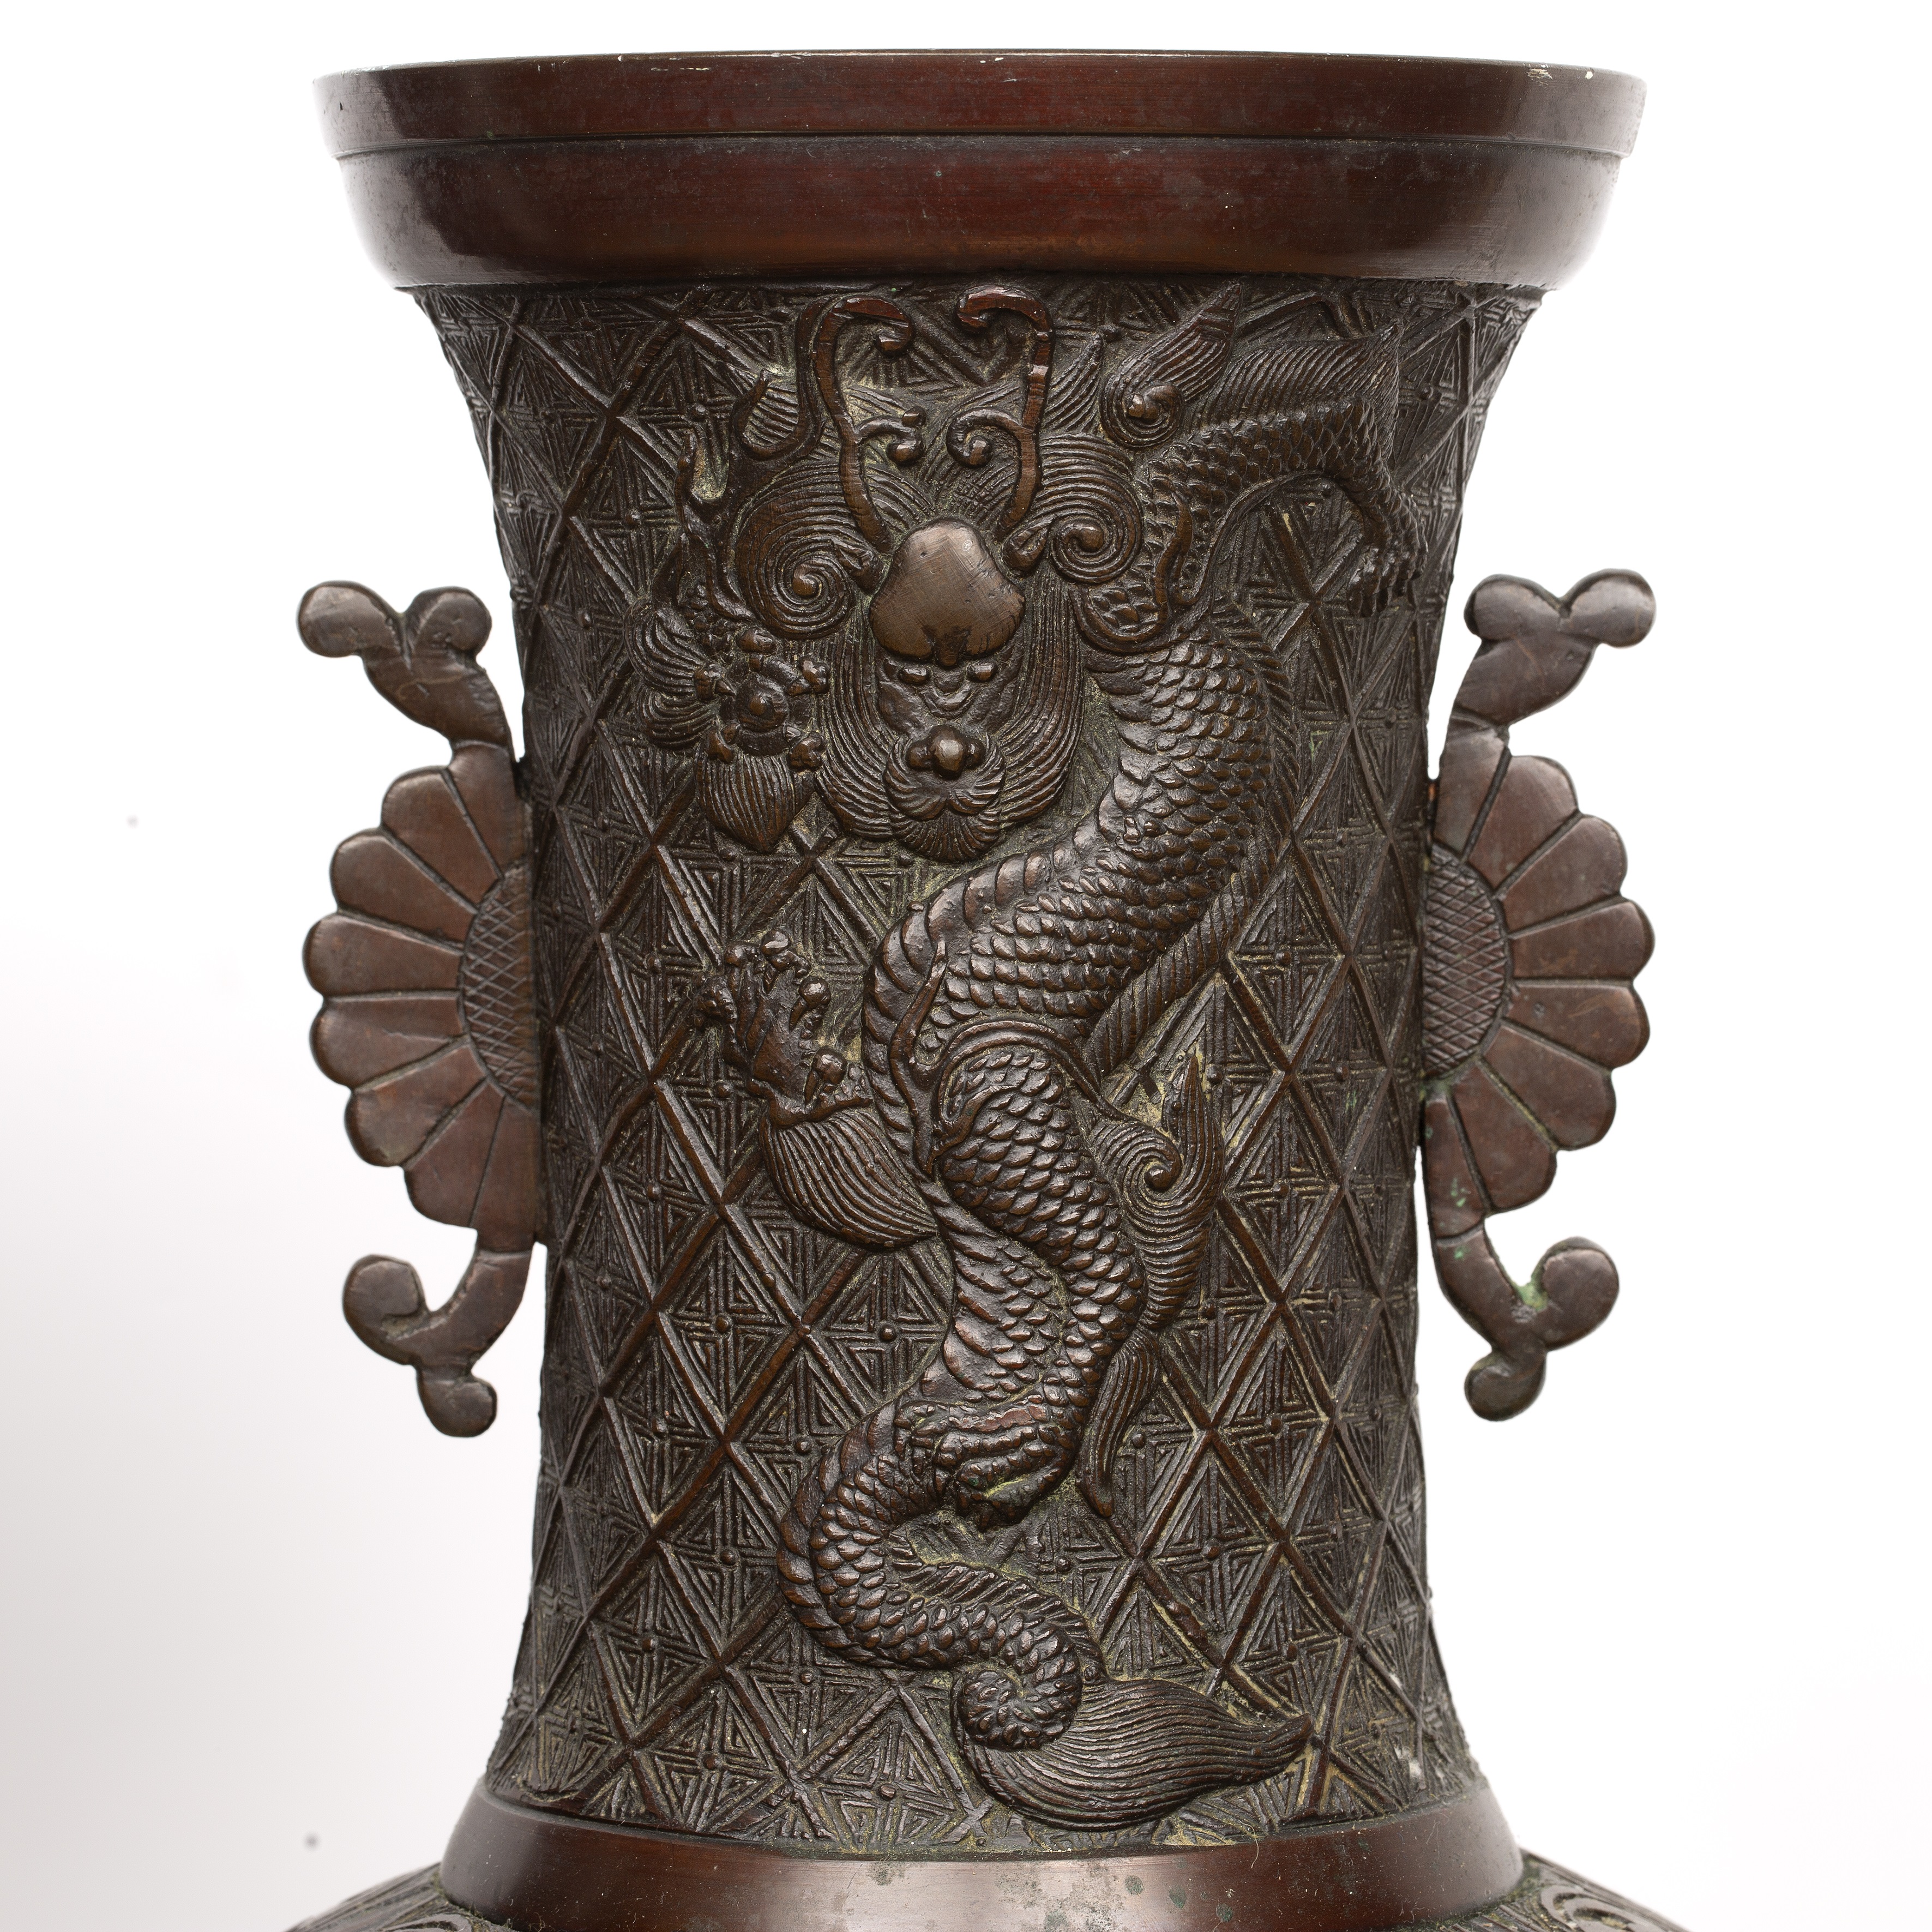 Pair of bronze vases Japanese, late 19th Century decorated with birds and mons motifs, with an - Image 3 of 7